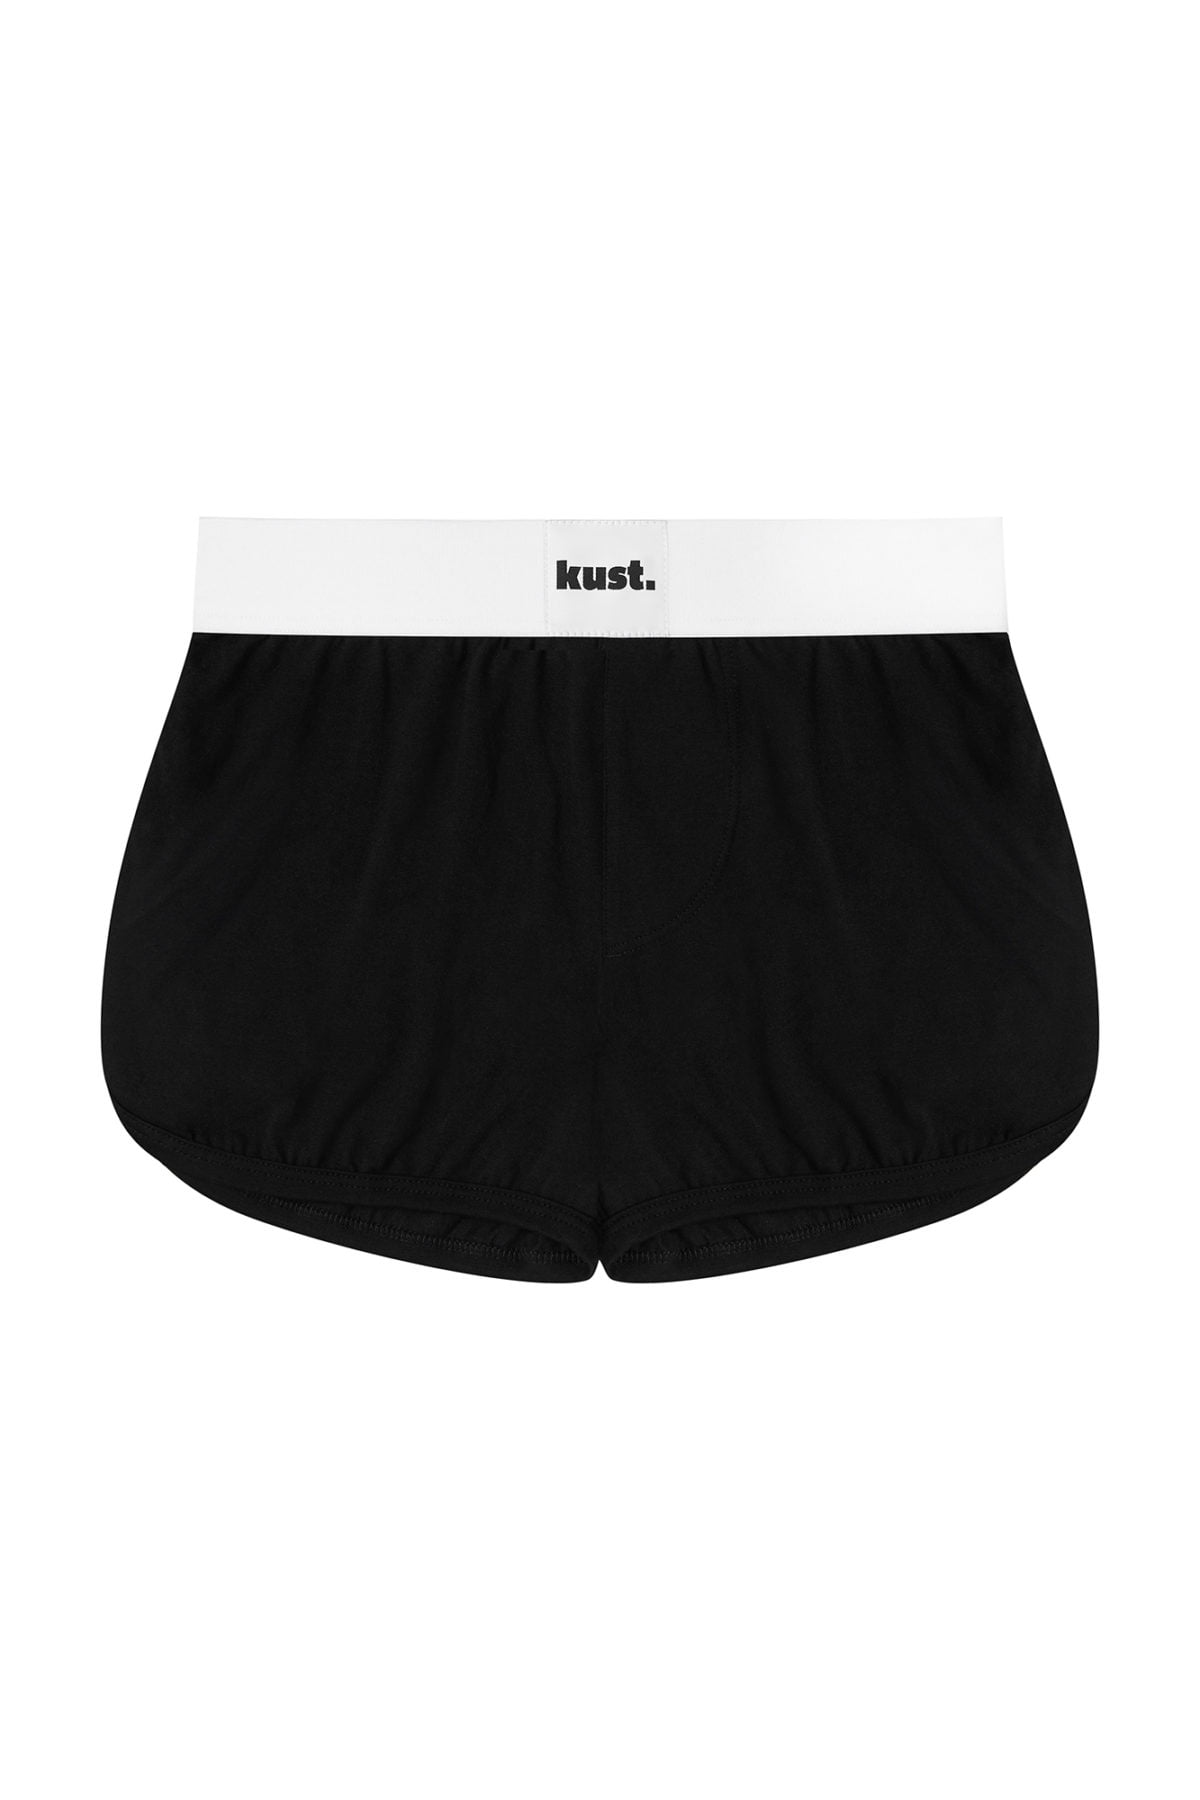 Organic cotton mens shorts, hybrid of boxer and running shorts. Inspired by 70's classic sport design, translated into modern and comfortable undergarment.